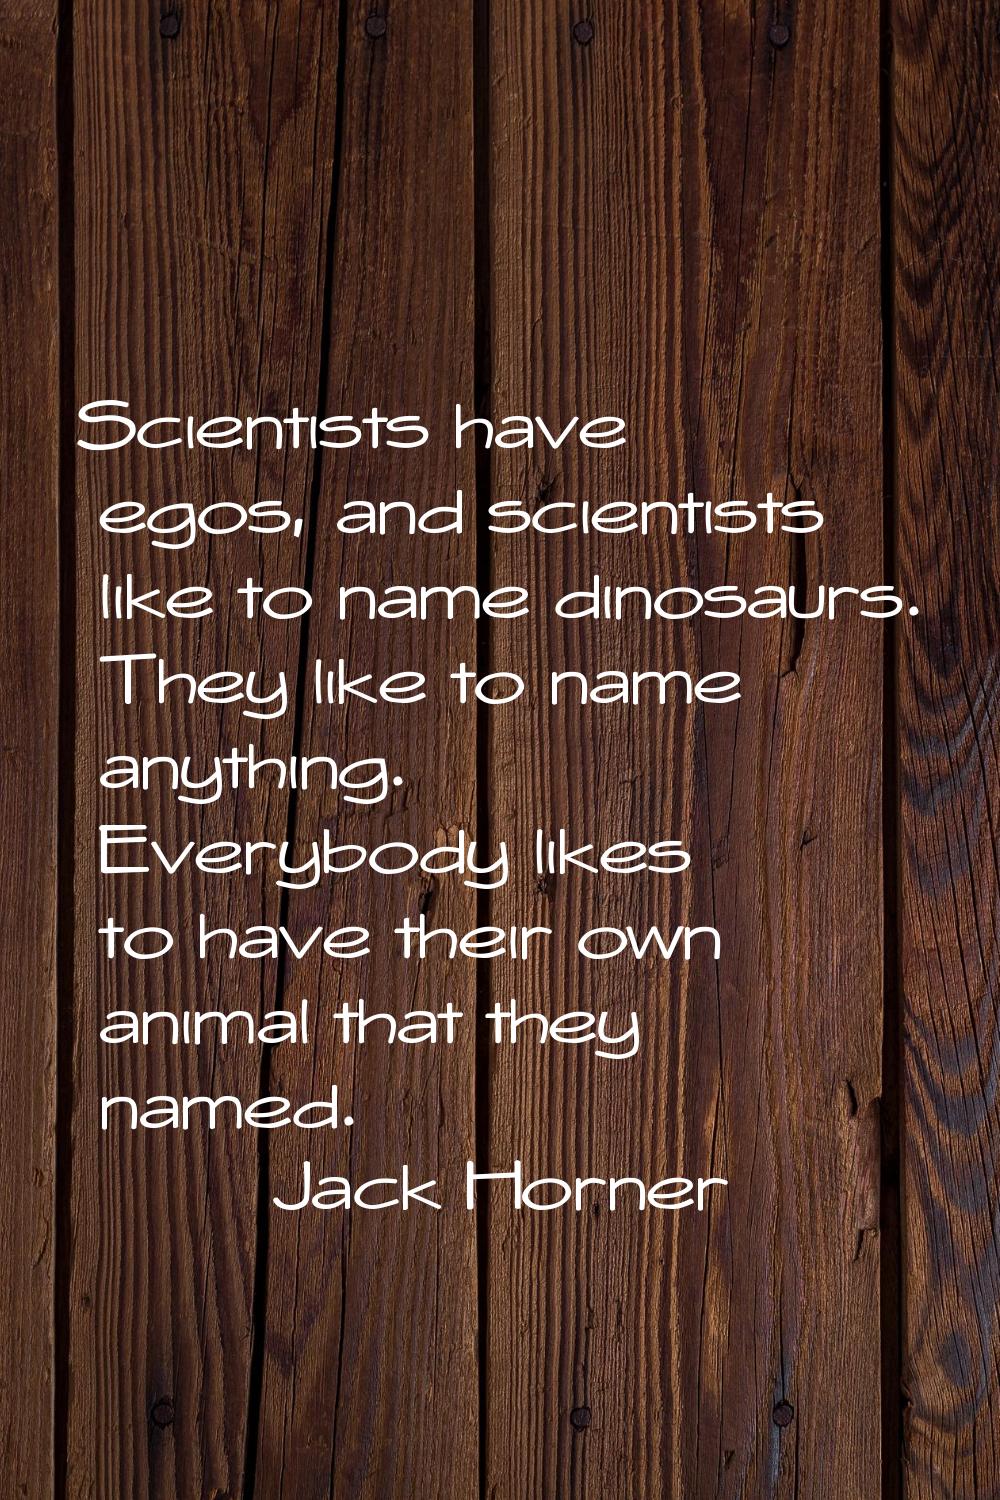 Scientists have egos, and scientists like to name dinosaurs. They like to name anything. Everybody 